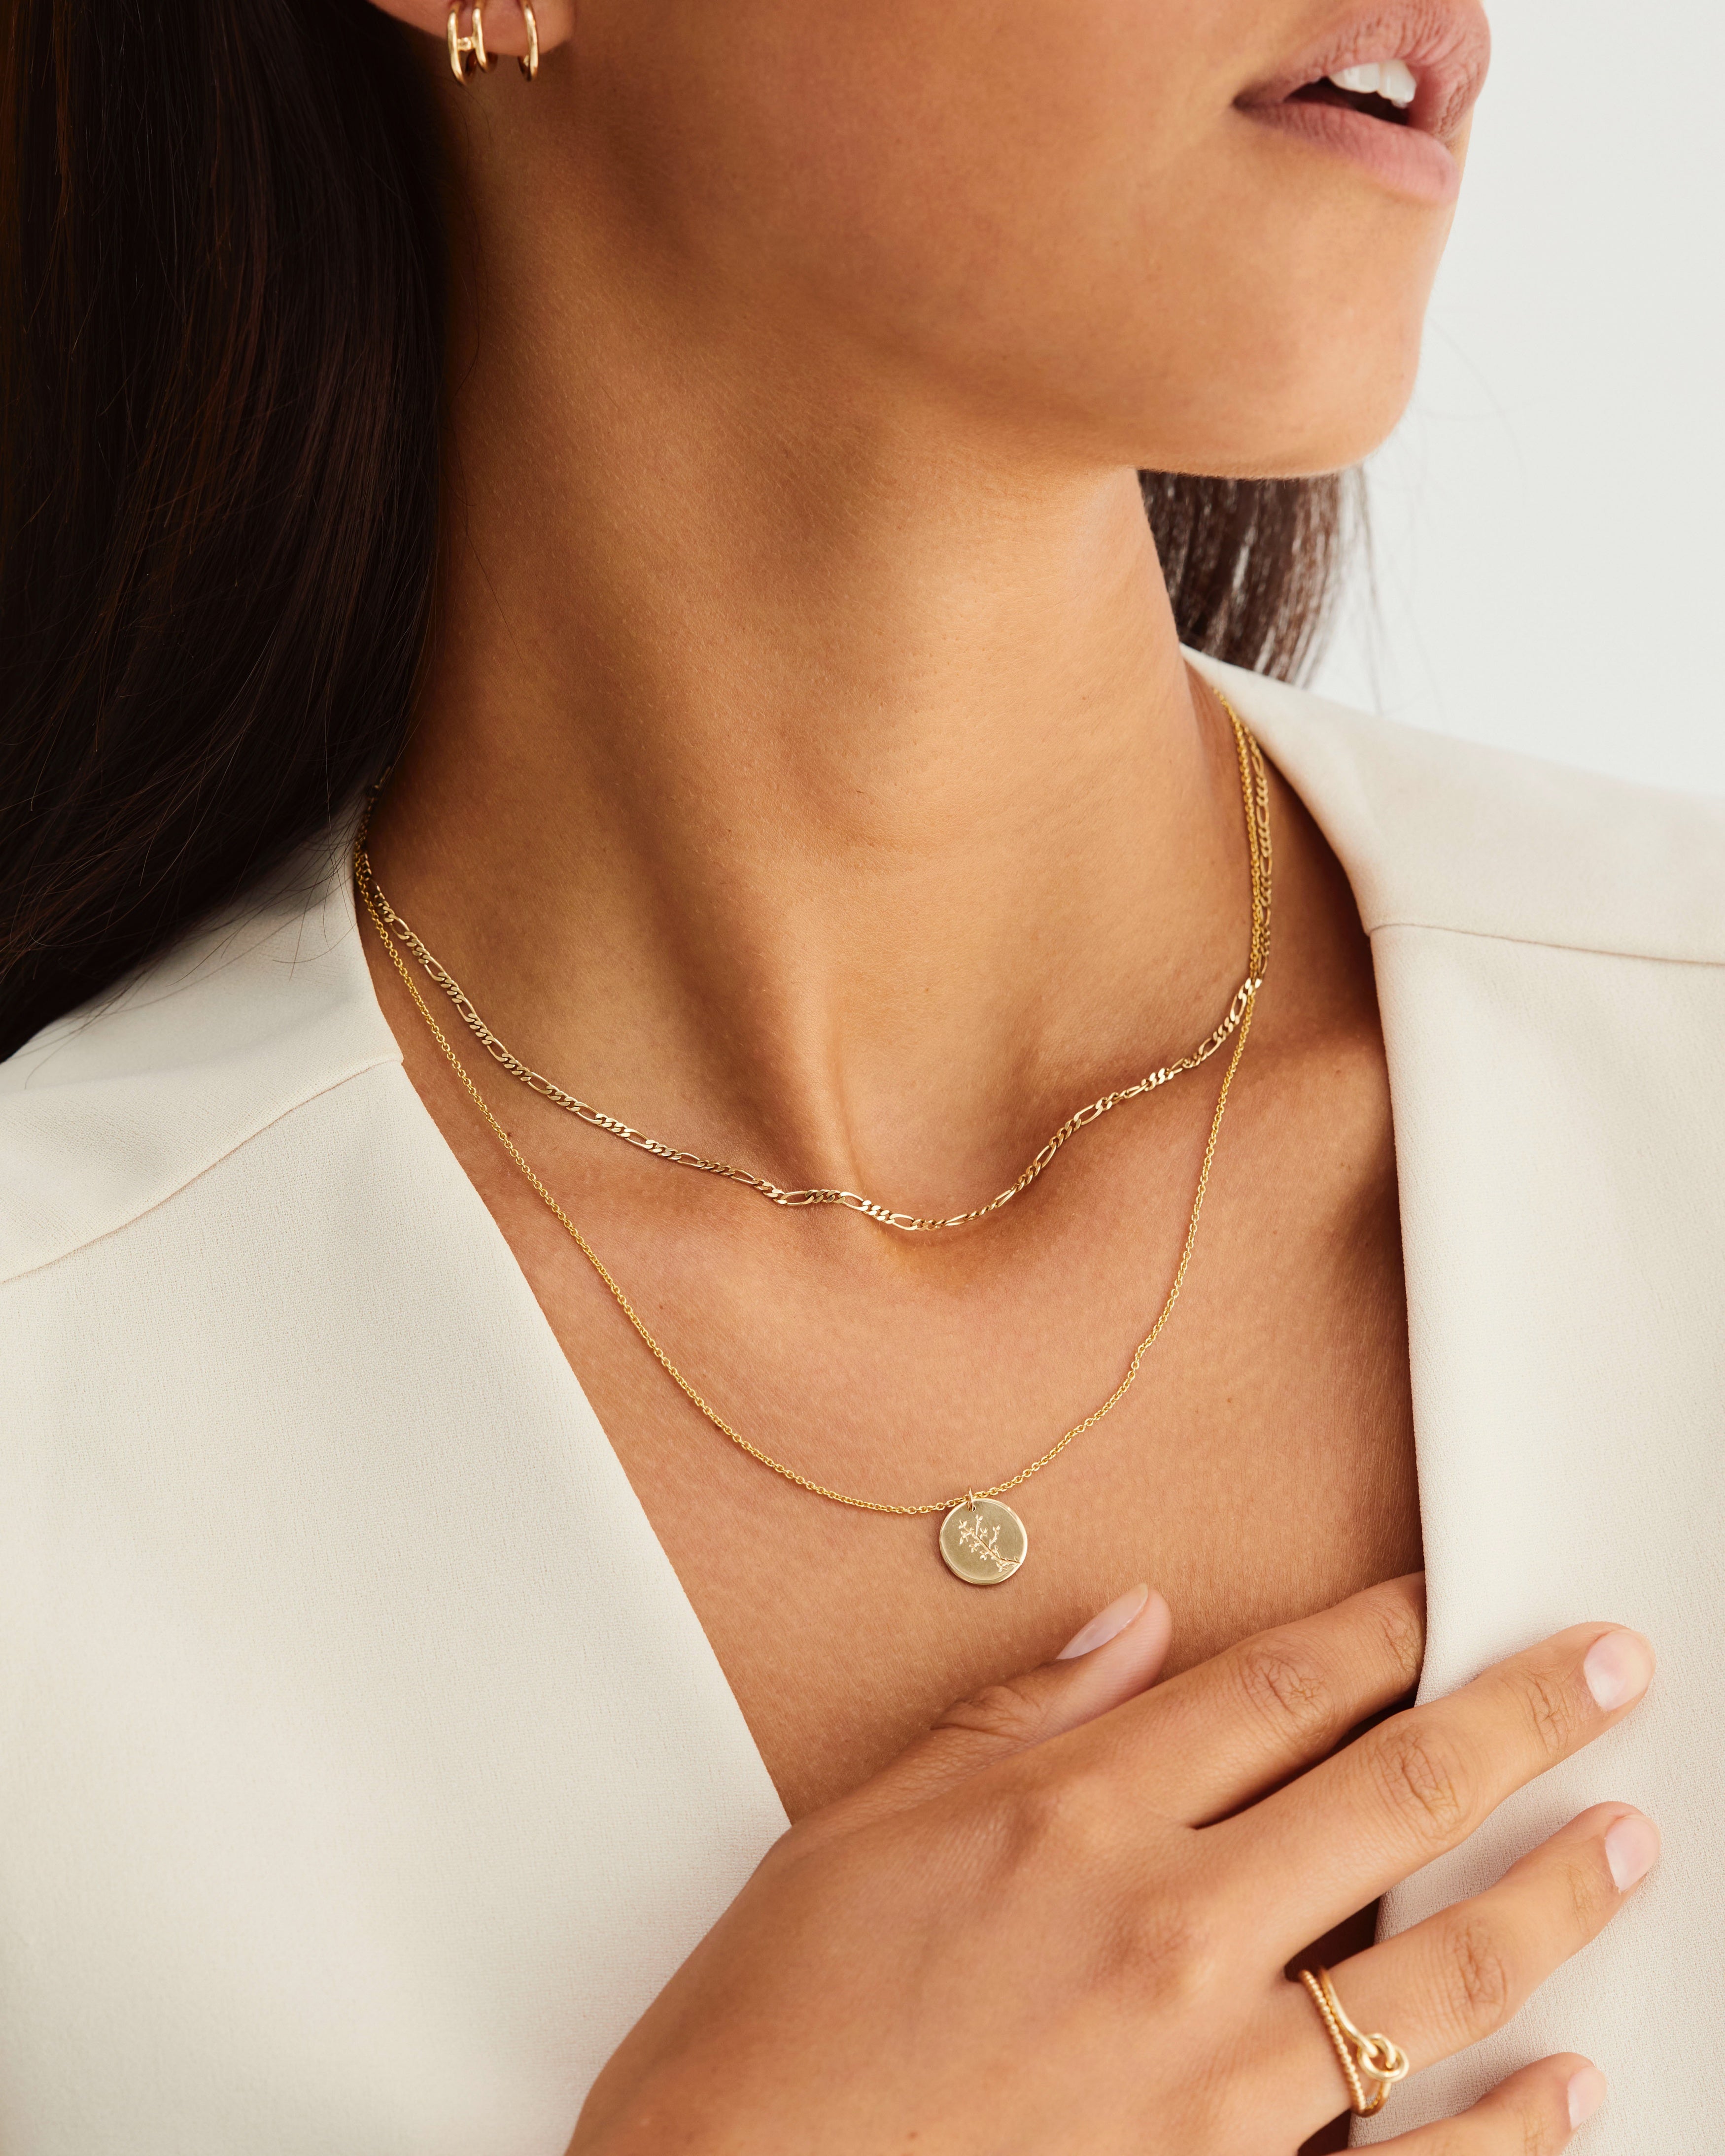 A woman wearing the Clematis Vine Necklace in yellow gold.